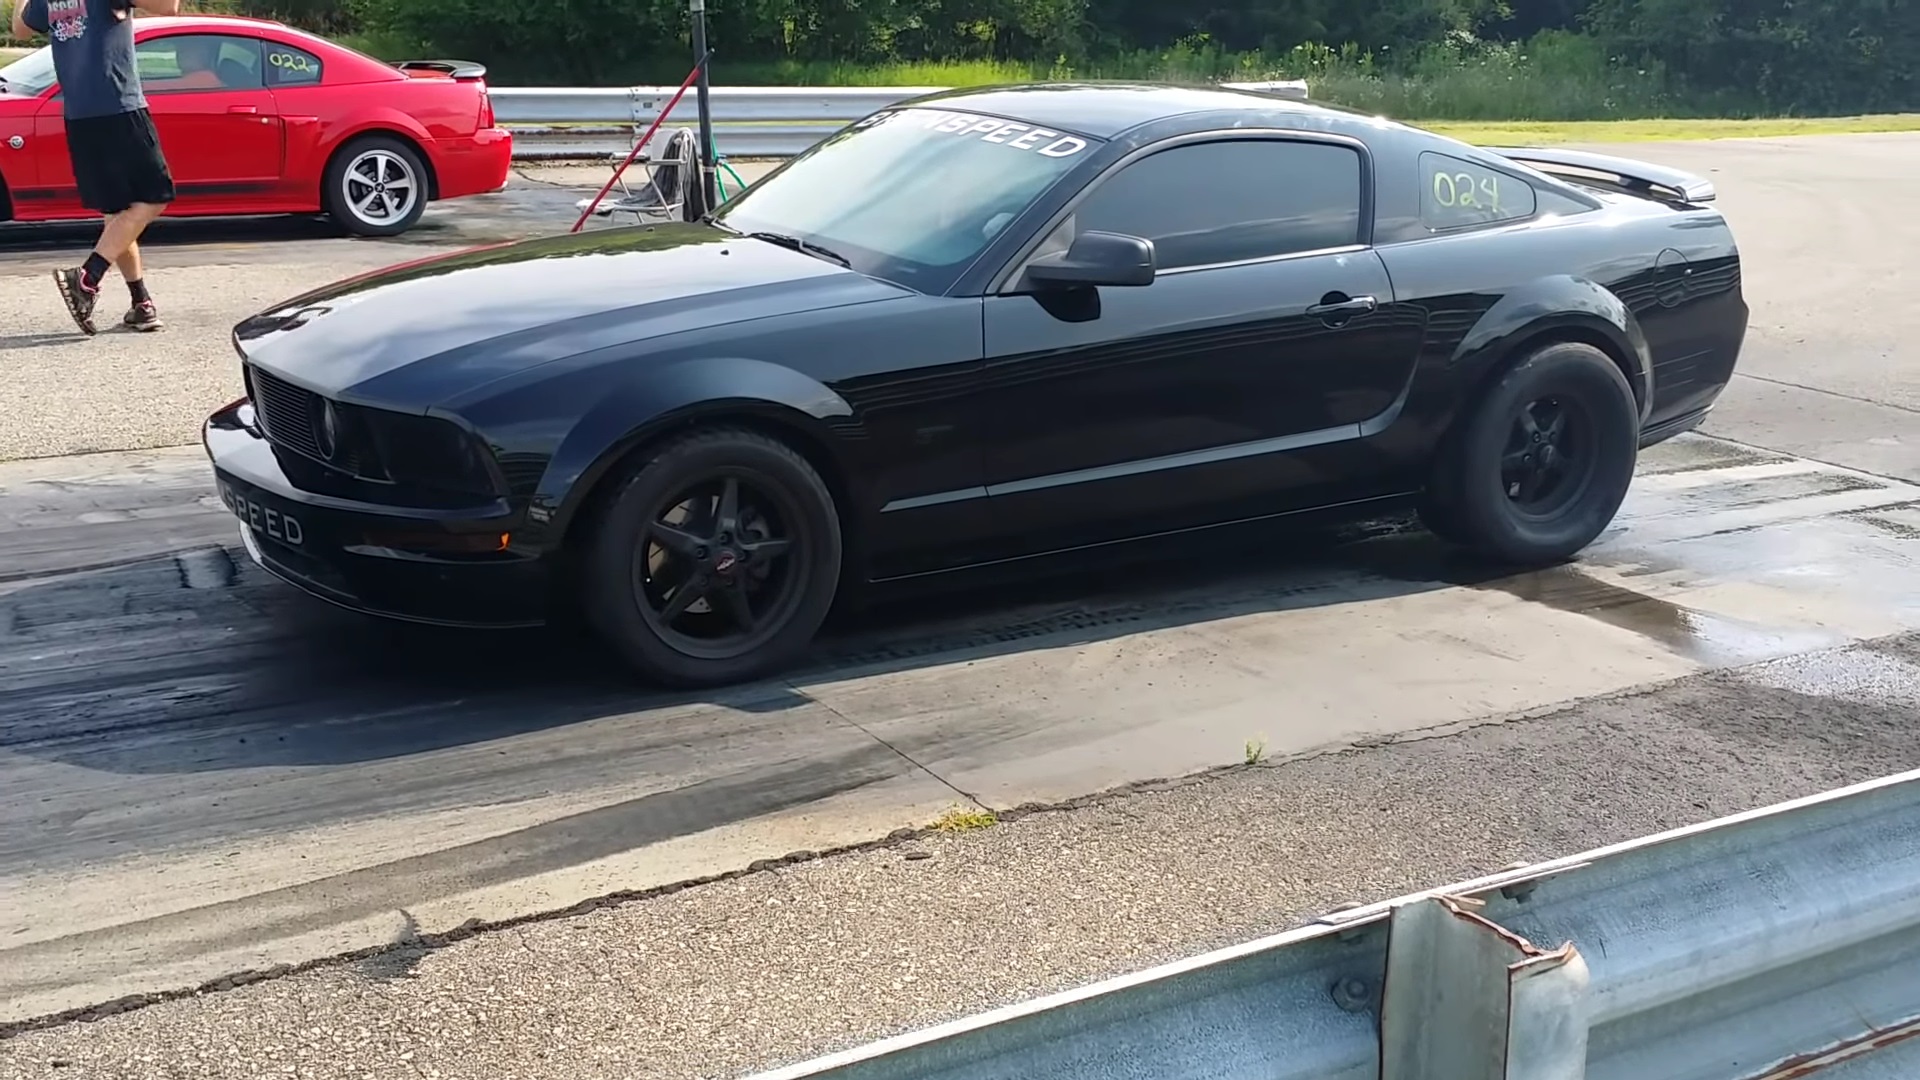 Video: 2006 Ford Mustang GT vs 2003 Mach 1 Mustang Shoot Out